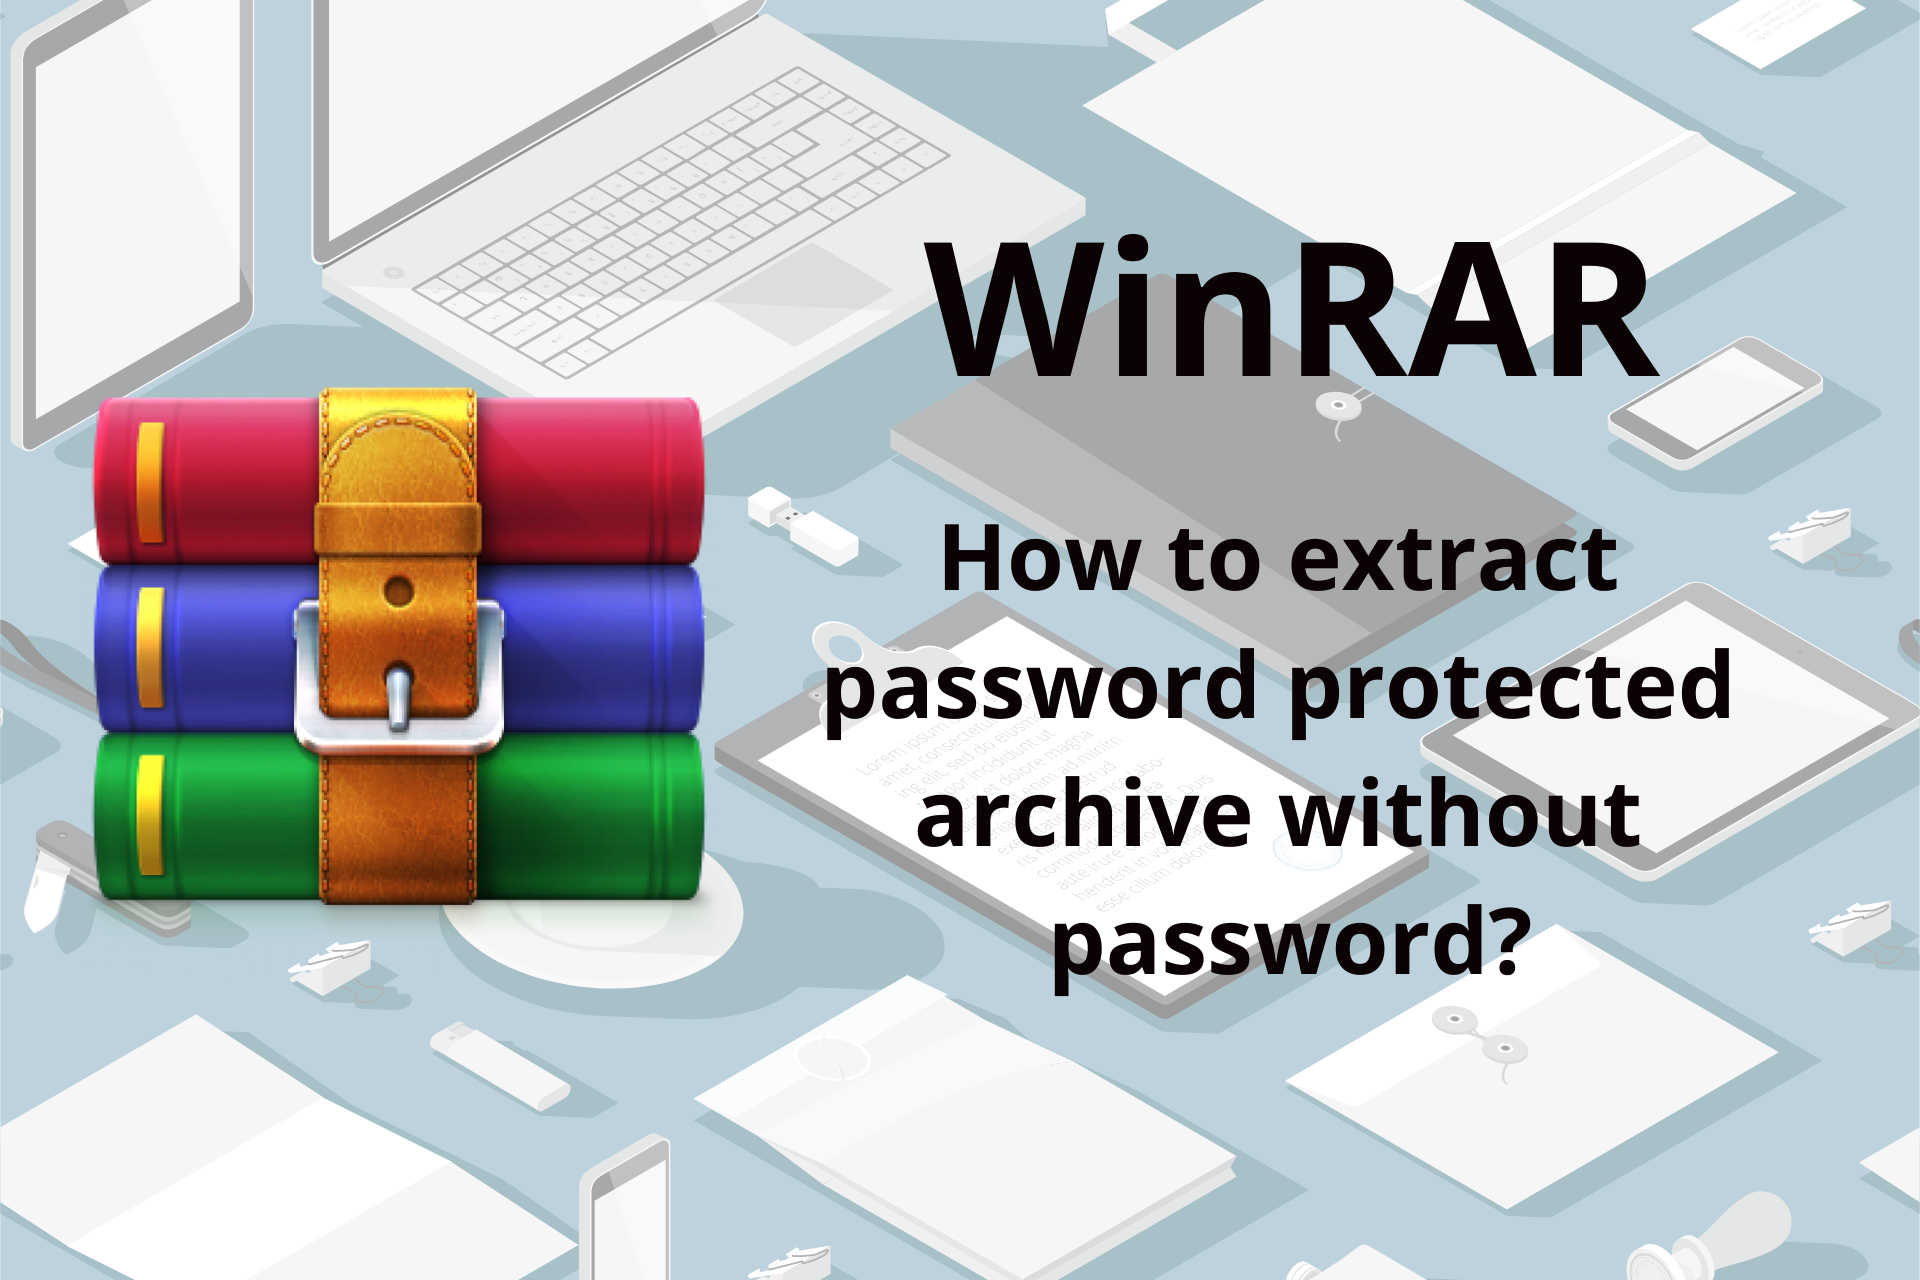 How can I extract password protected RAR without password